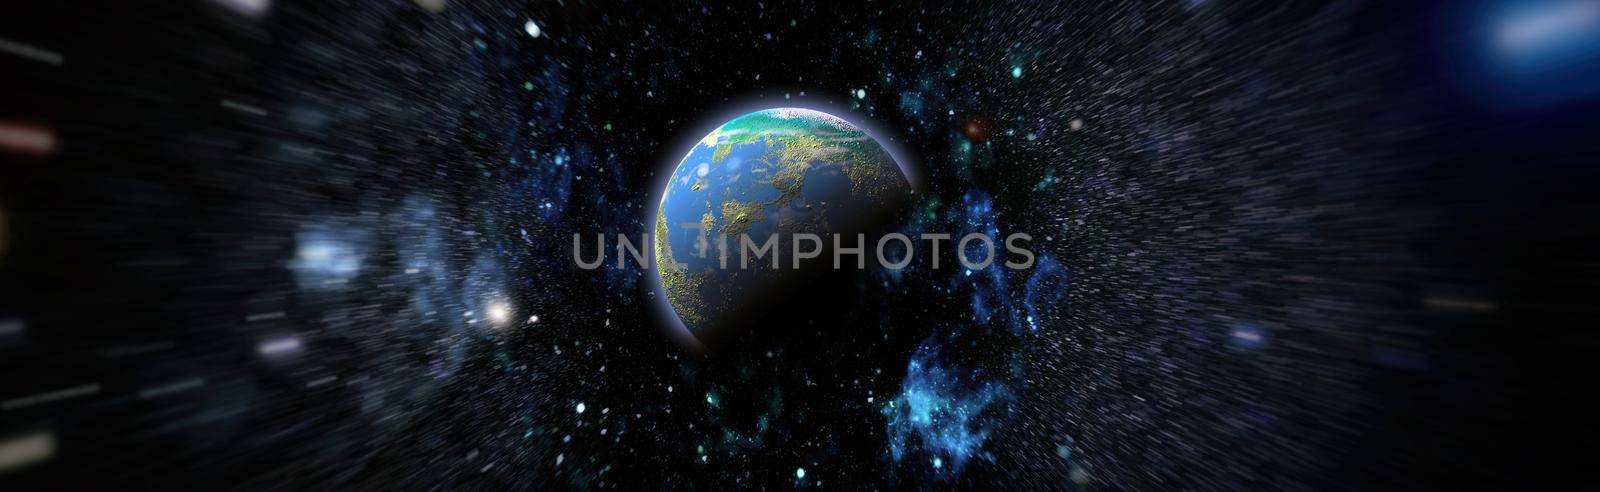 Outer space. Science fiction cosmos. planets, stars and galaxies in outer space showing the beauty of space exploration.